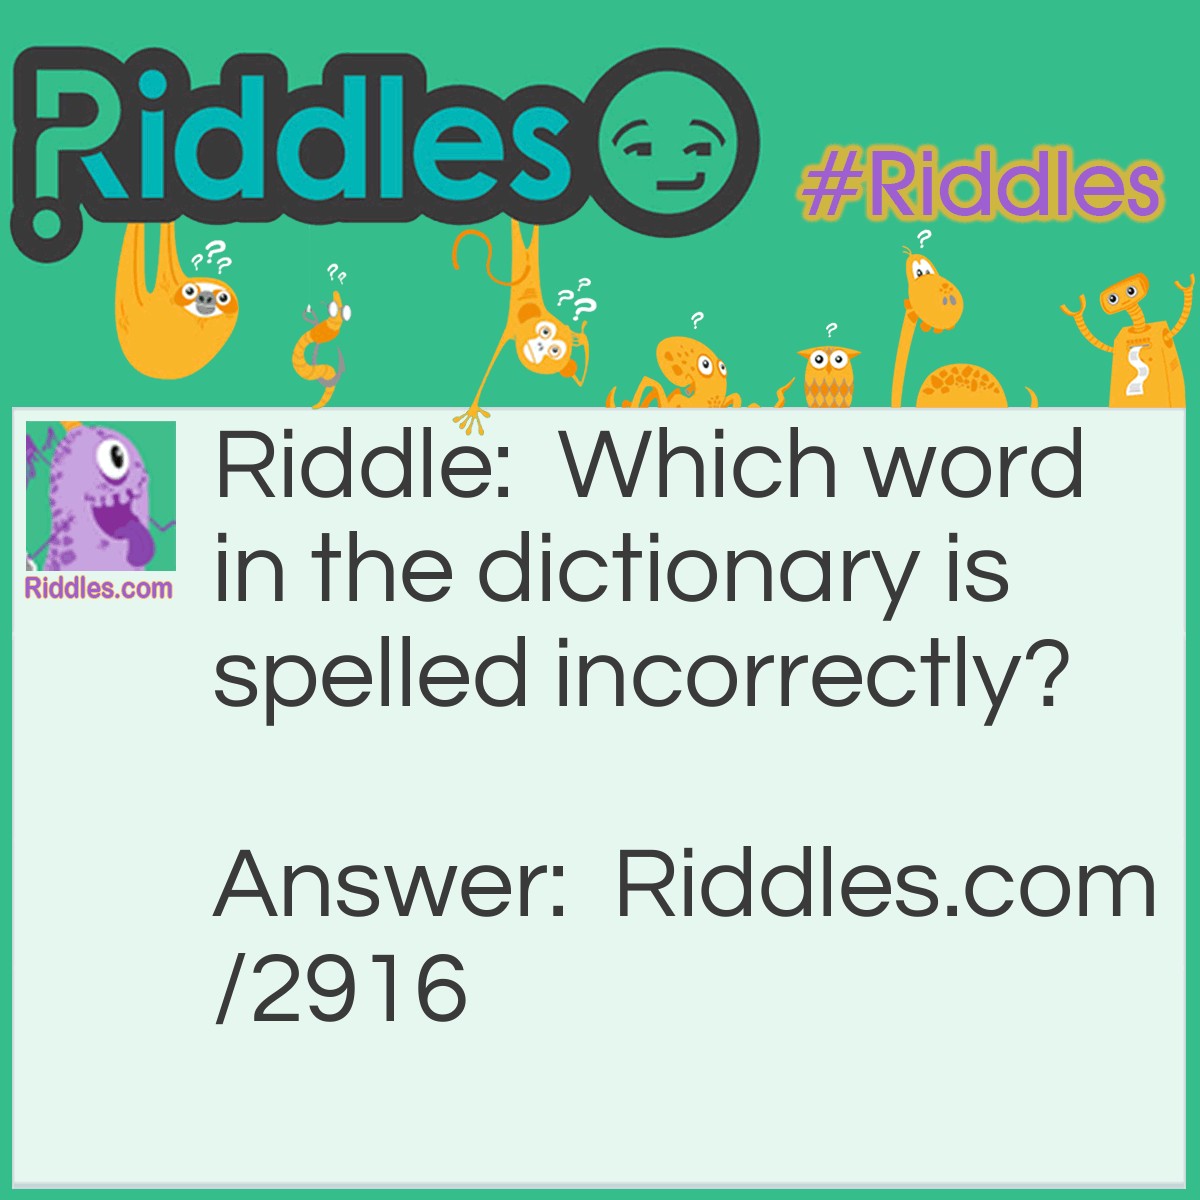 Riddle: Which word in the dictionary is spelled incorrectly? Answer: Incorrectly.